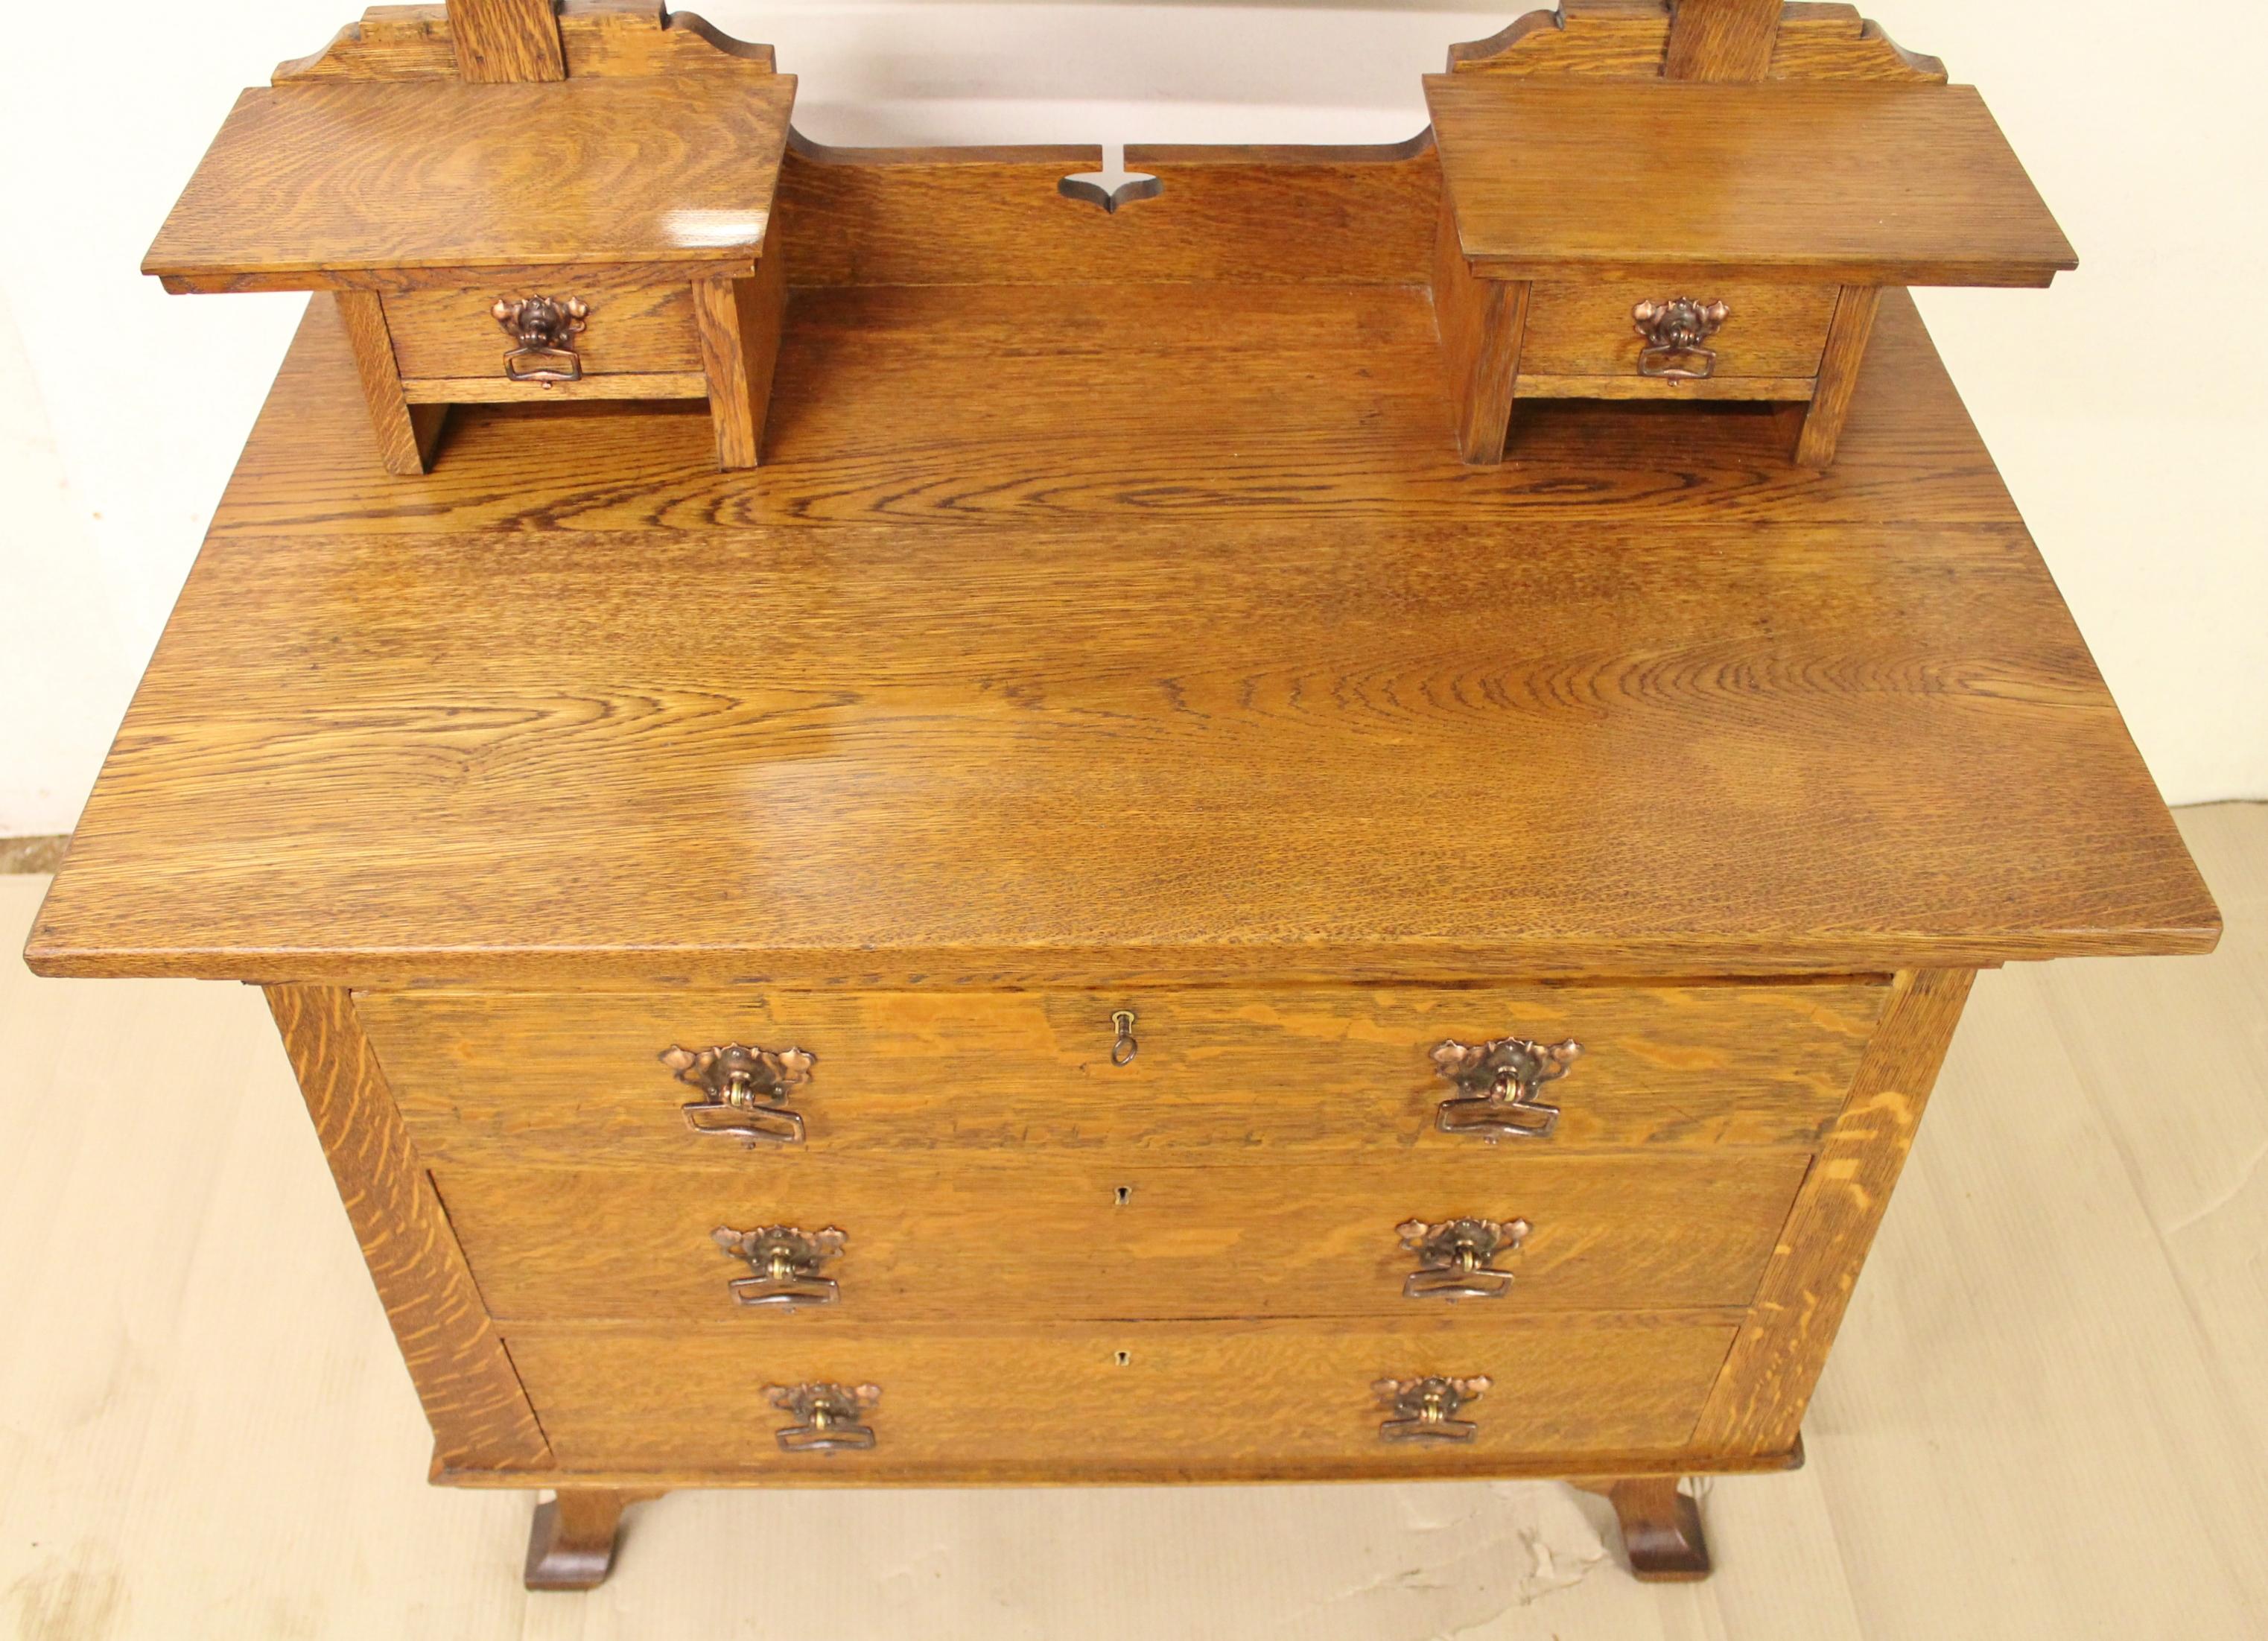 A fantastic and rare oak arts and crafts or art nouveau dressing chest as originally retailed by Liberty and Co. Of superb construction in solid English oak, now with a wonderful honey tone and patina. With beautiful design features redolent of the